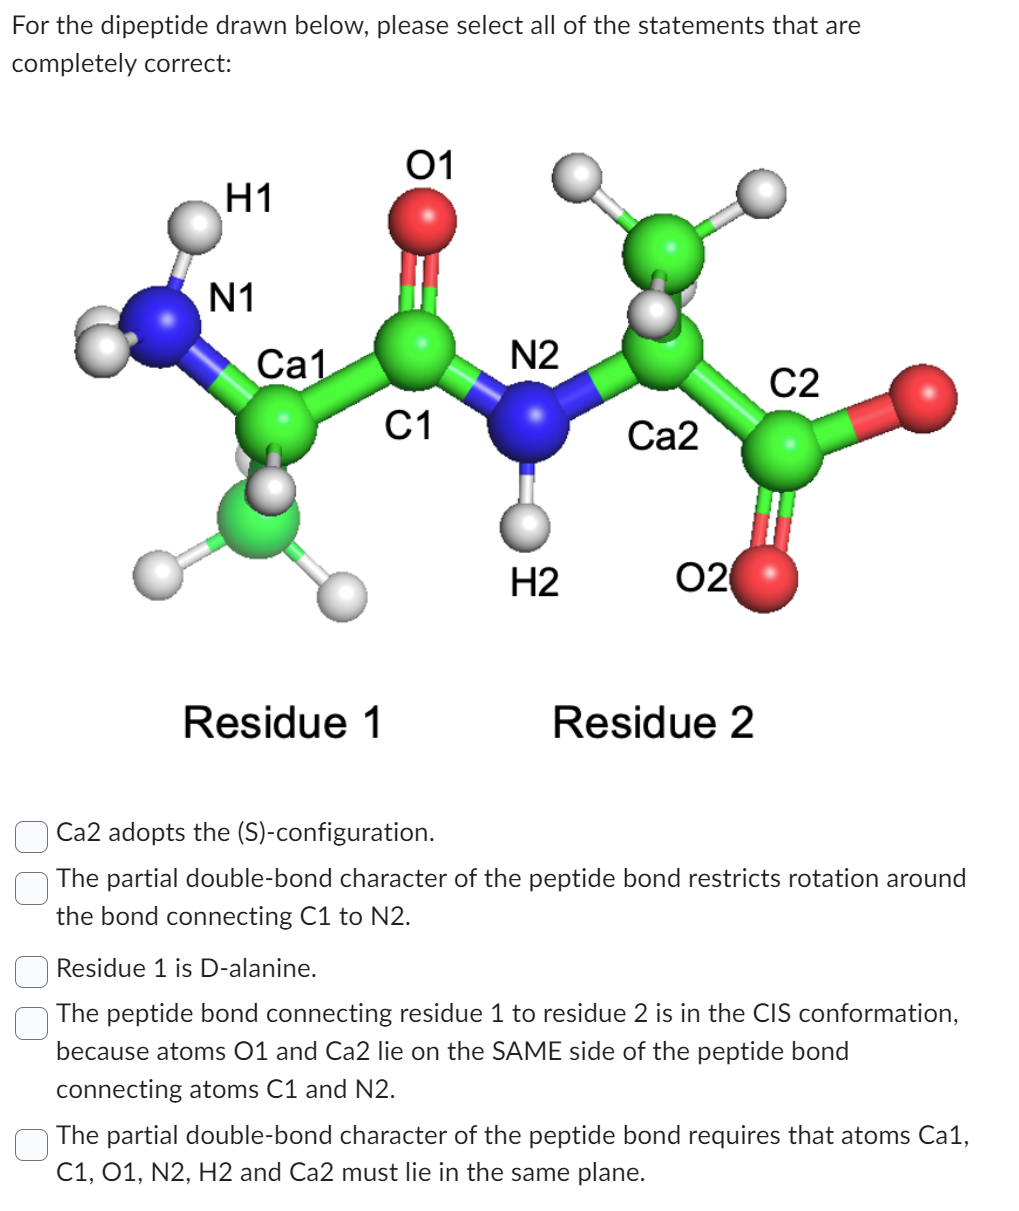 For the dipeptide drawn below, please select all of the statements that are
completely correct:
H1
N1
Cal
Residue 1
01
C1
N2
H2
Ca2
02
Residue 2
C2
Ca2 adopts the (S)-configuration.
The partial double-bond character of the peptide bond restricts rotation around
the bond connecting C1 to N2.
Residue 1 is D-alanine.
The peptide bond connecting residue 1 to residue 2 is in the CIS conformation,
because atoms 01 and Ca2 lie on the SAME side of the peptide bond
connecting atoms C1 and N2.
The partial double-bond character of the peptide bond requires that atoms Ca1,
C1, 01, N2, H2 and Ca2 must lie in the same plane.